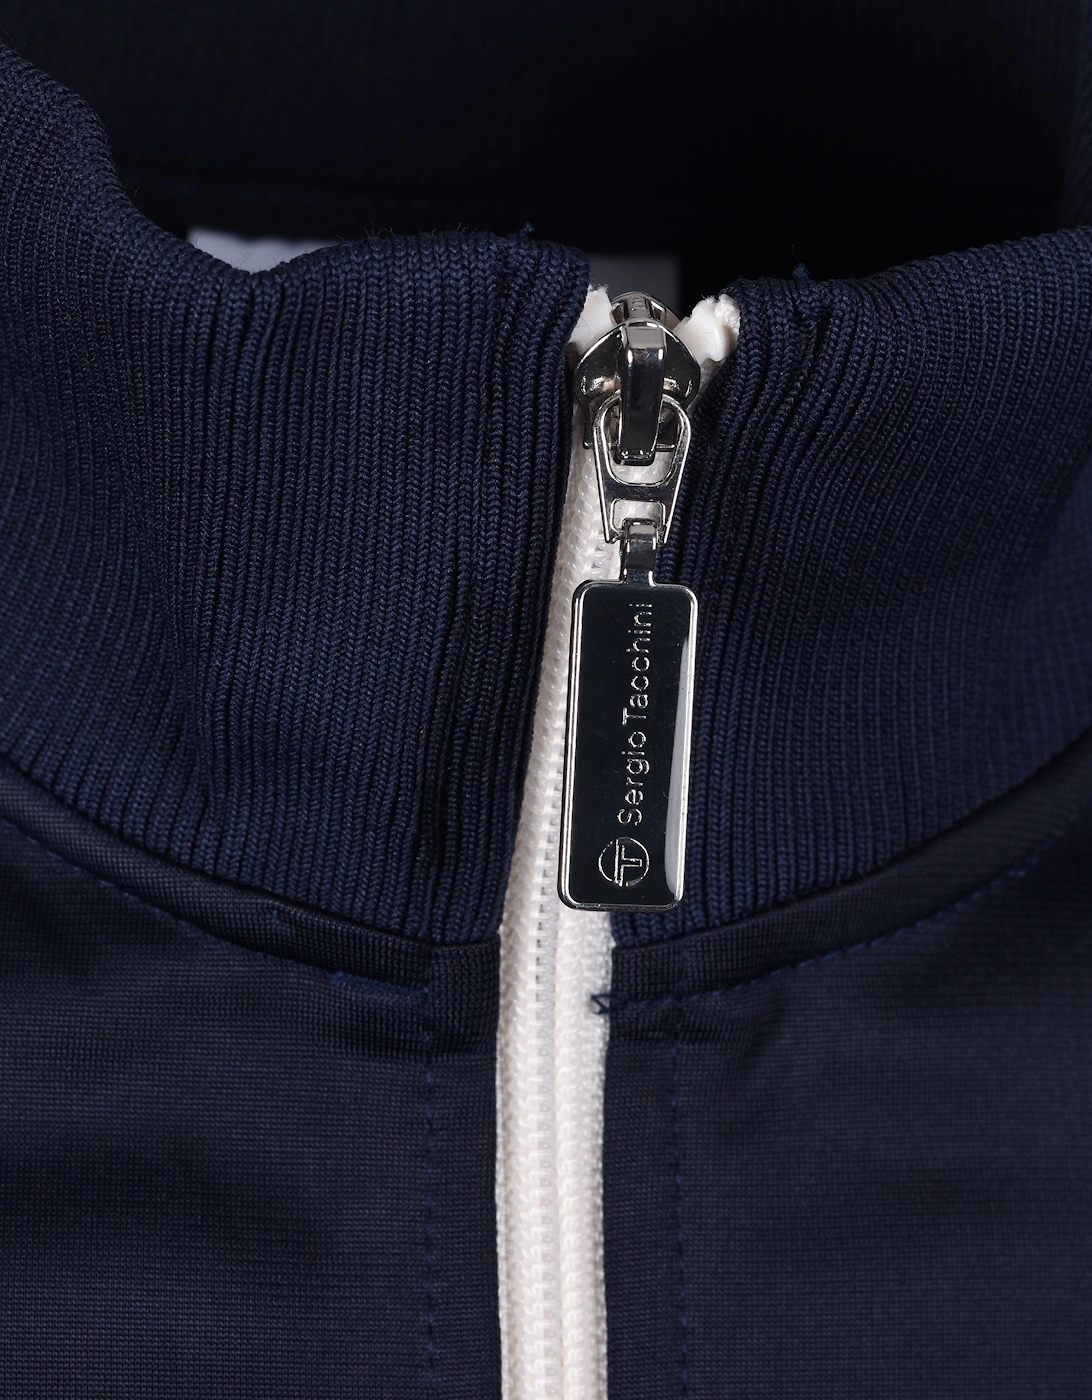 Fjord Track Top Maritime Blue